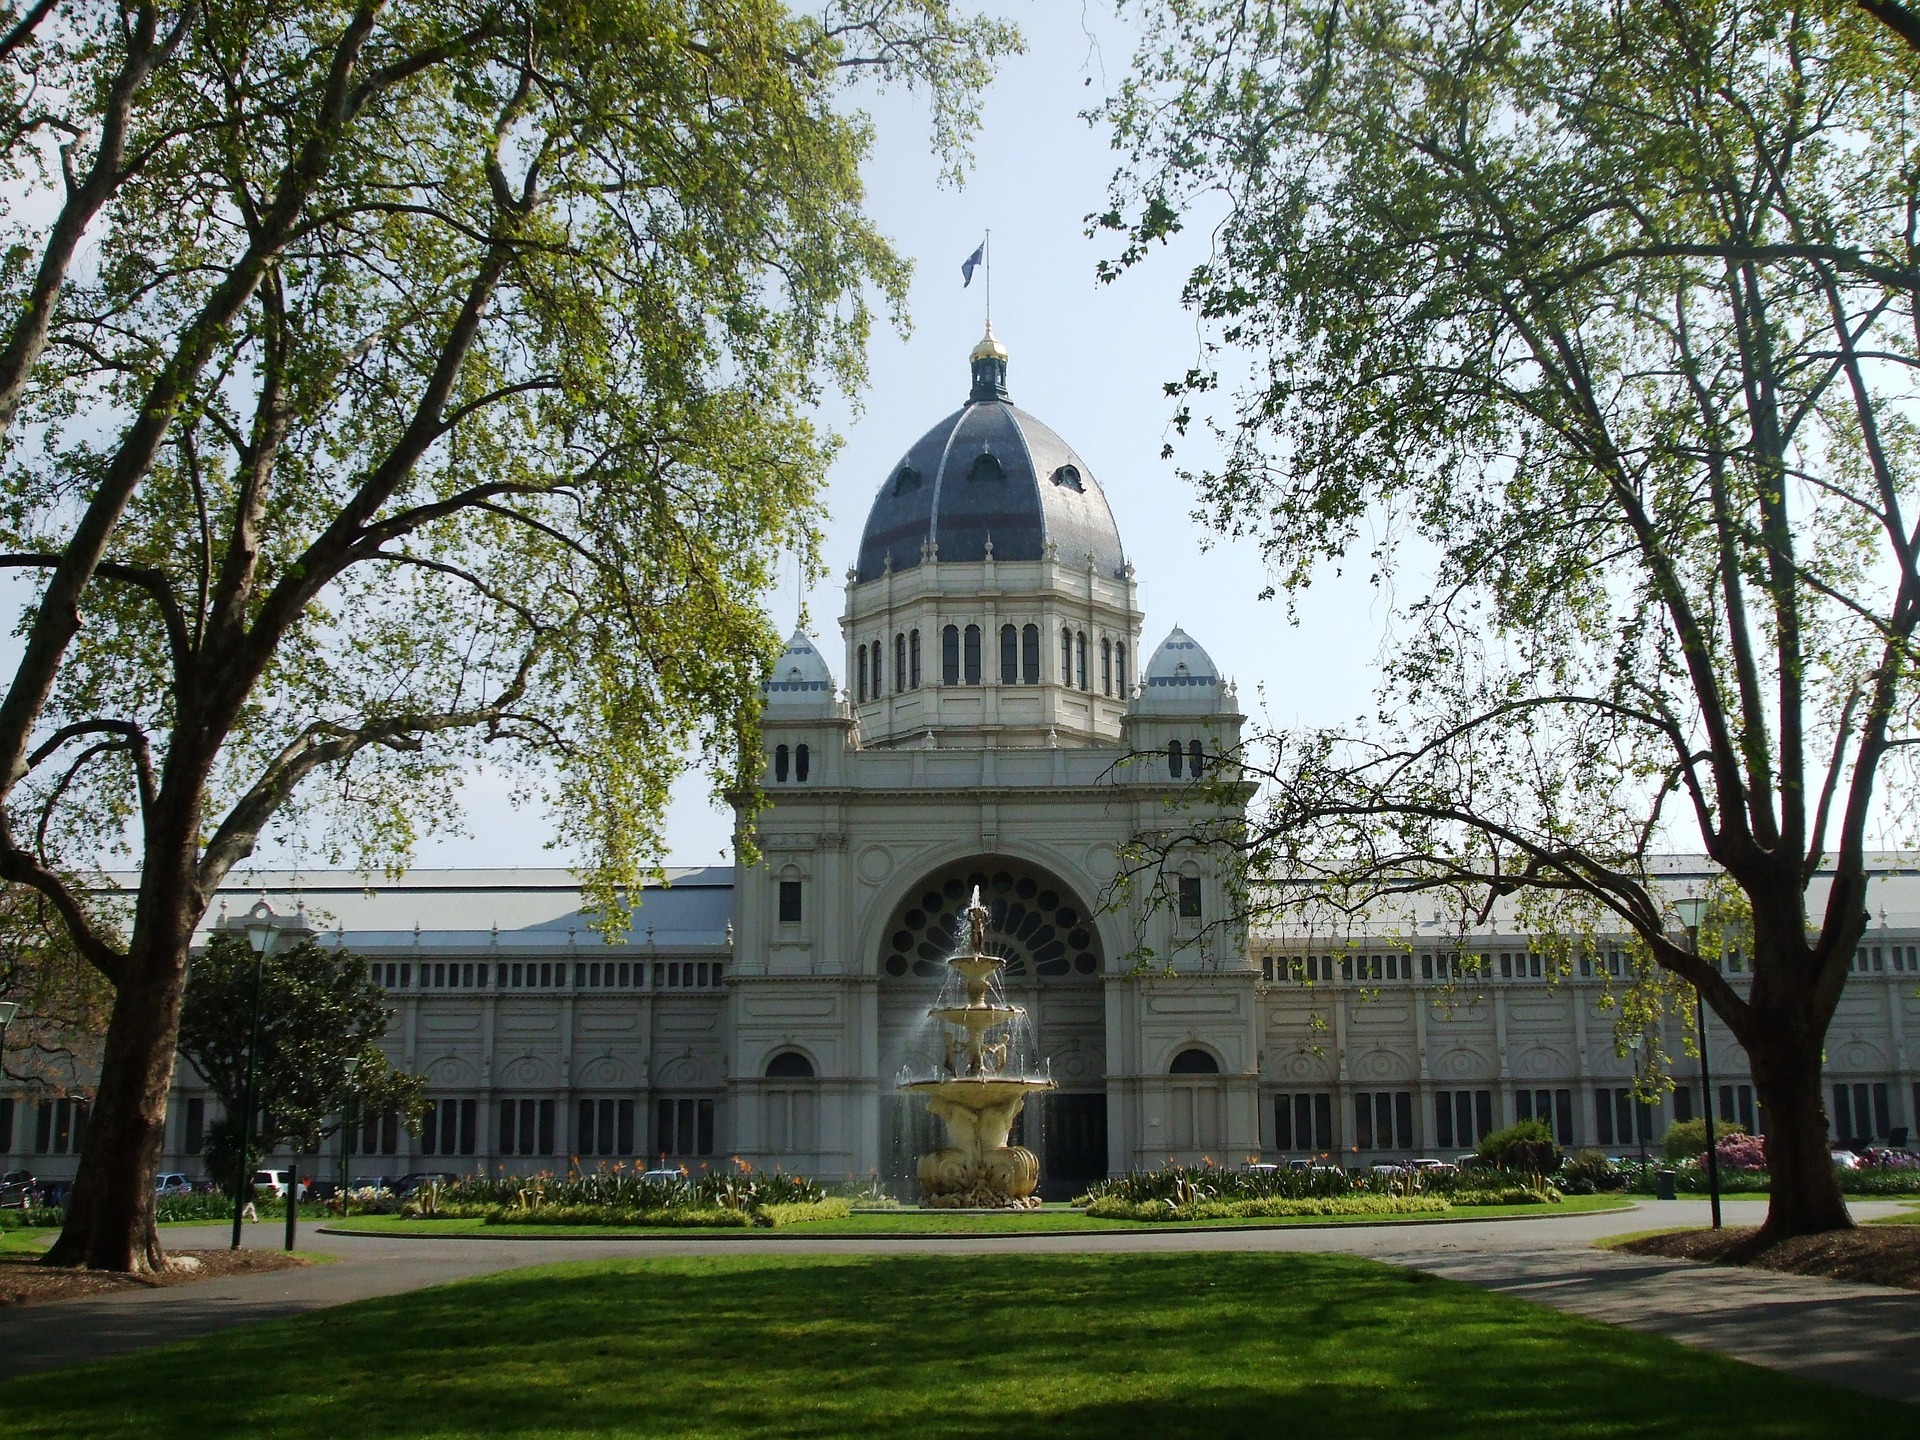 An image of the Royal Exhibition Building in Melbourne